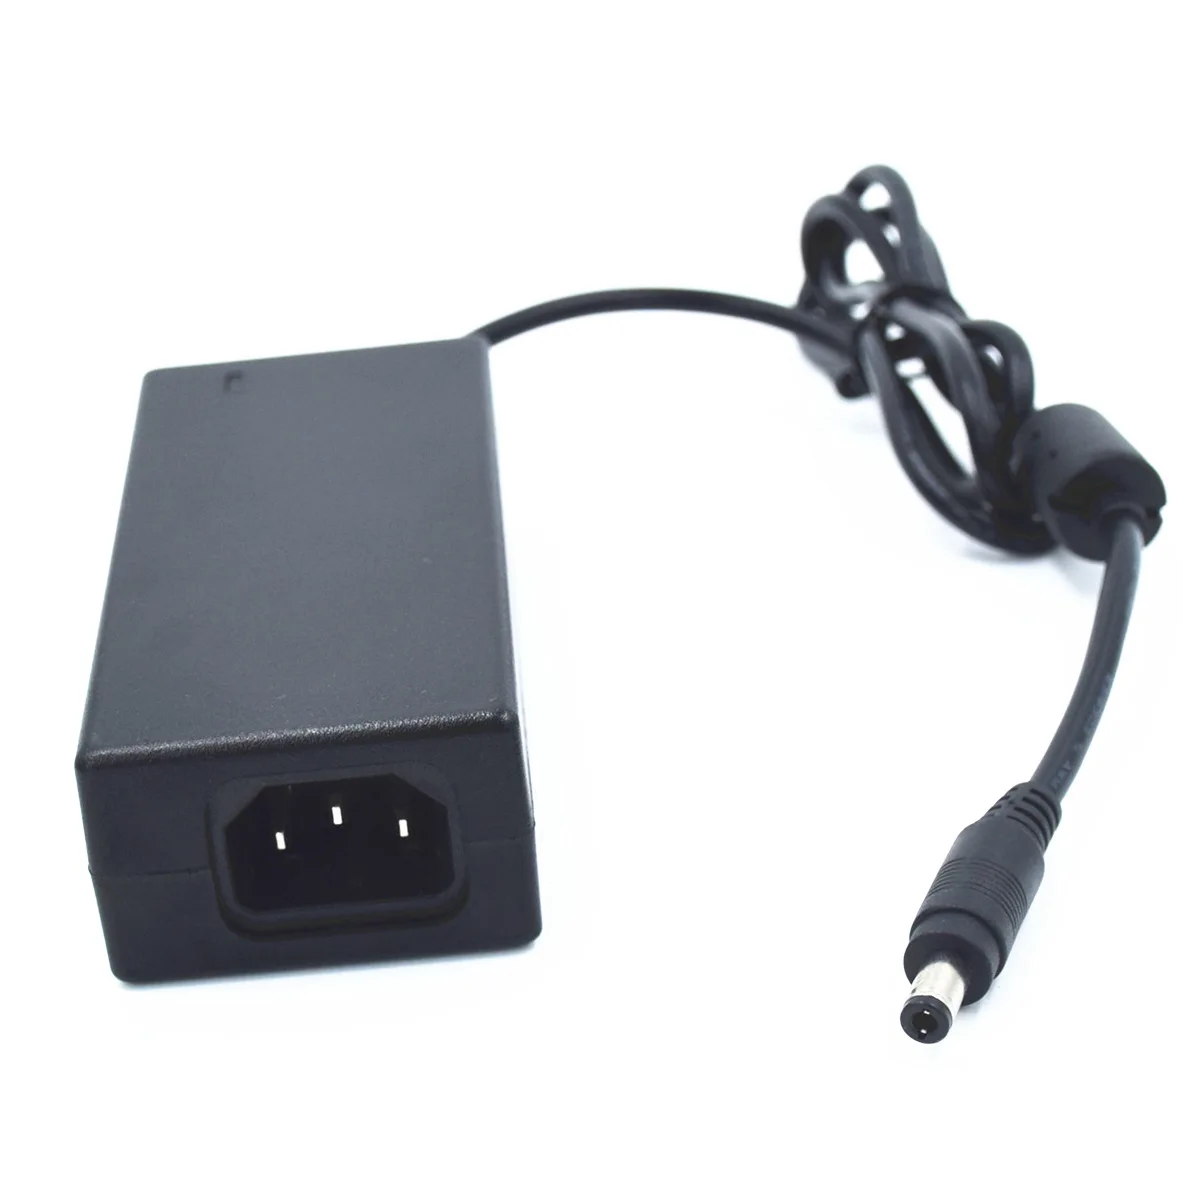 Switching CE FCC 24vdc 24 Volt 2 Amp 48w Led Power Supply 24v 2.0a AC DC Adapter 24volt 2amp Smps Adaptor